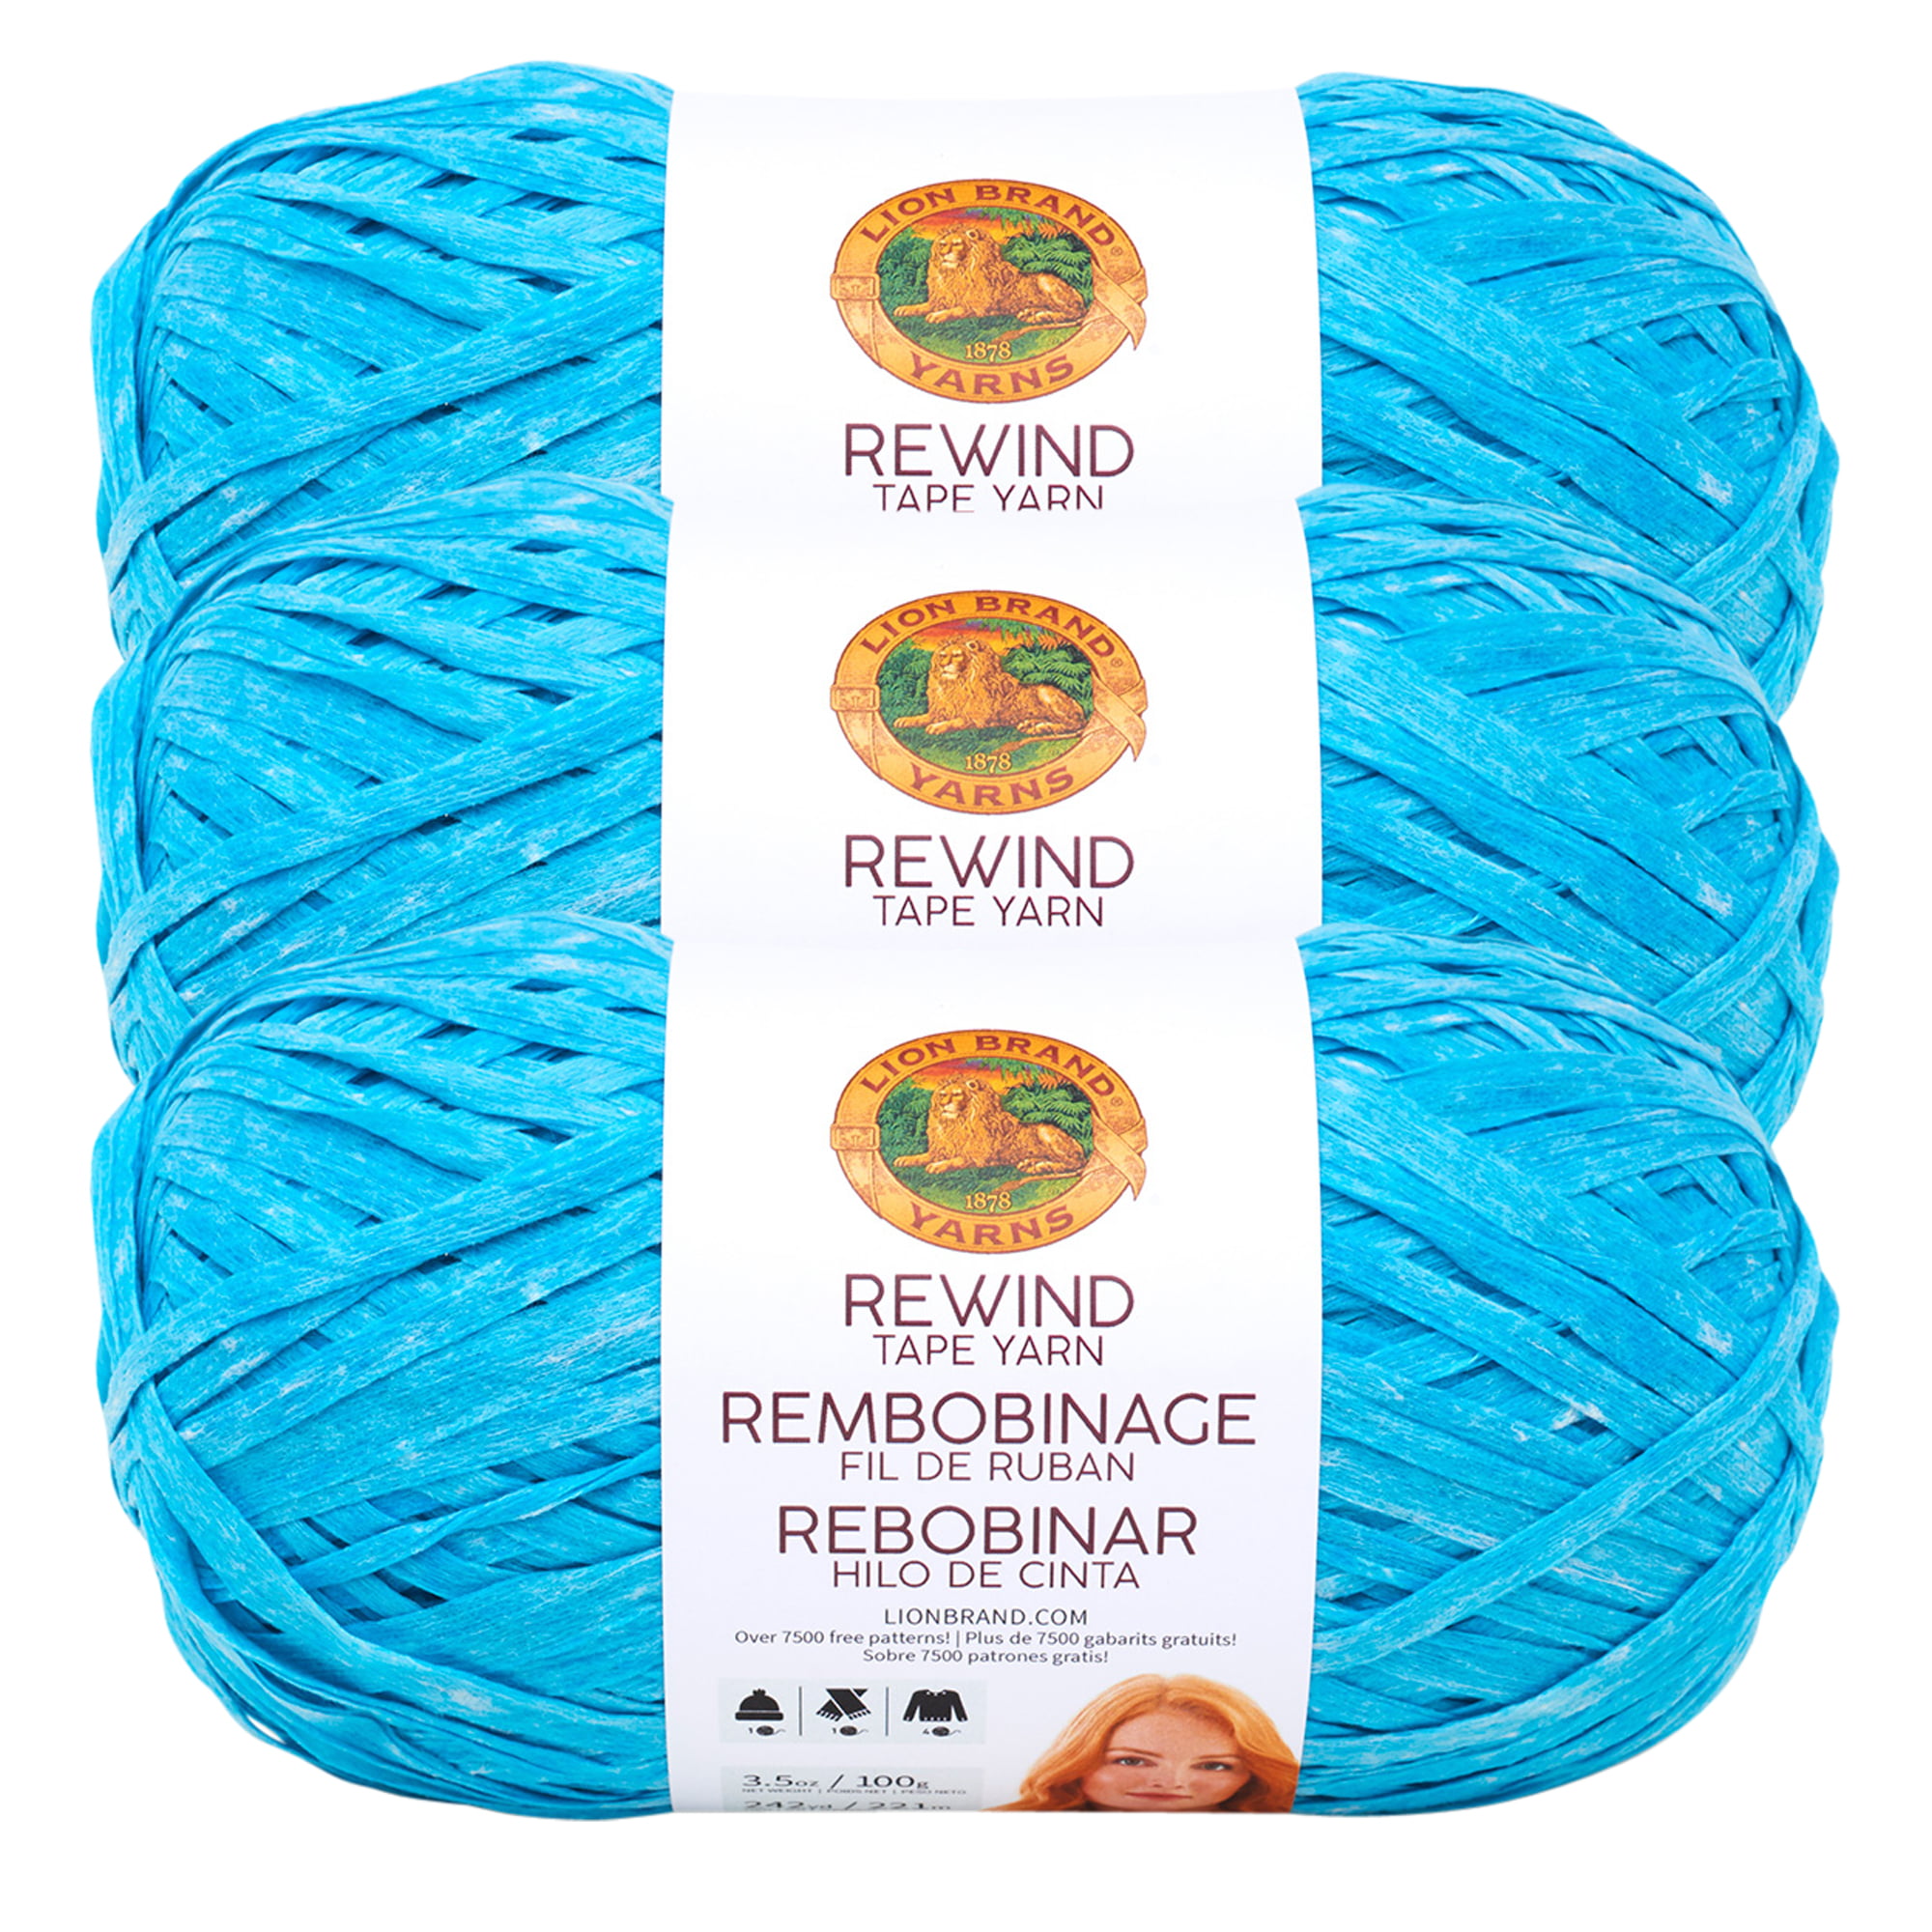 Lion Brand Yarn Truboo Yarn for Knitting and Crocheting, Sable, 3 Pack